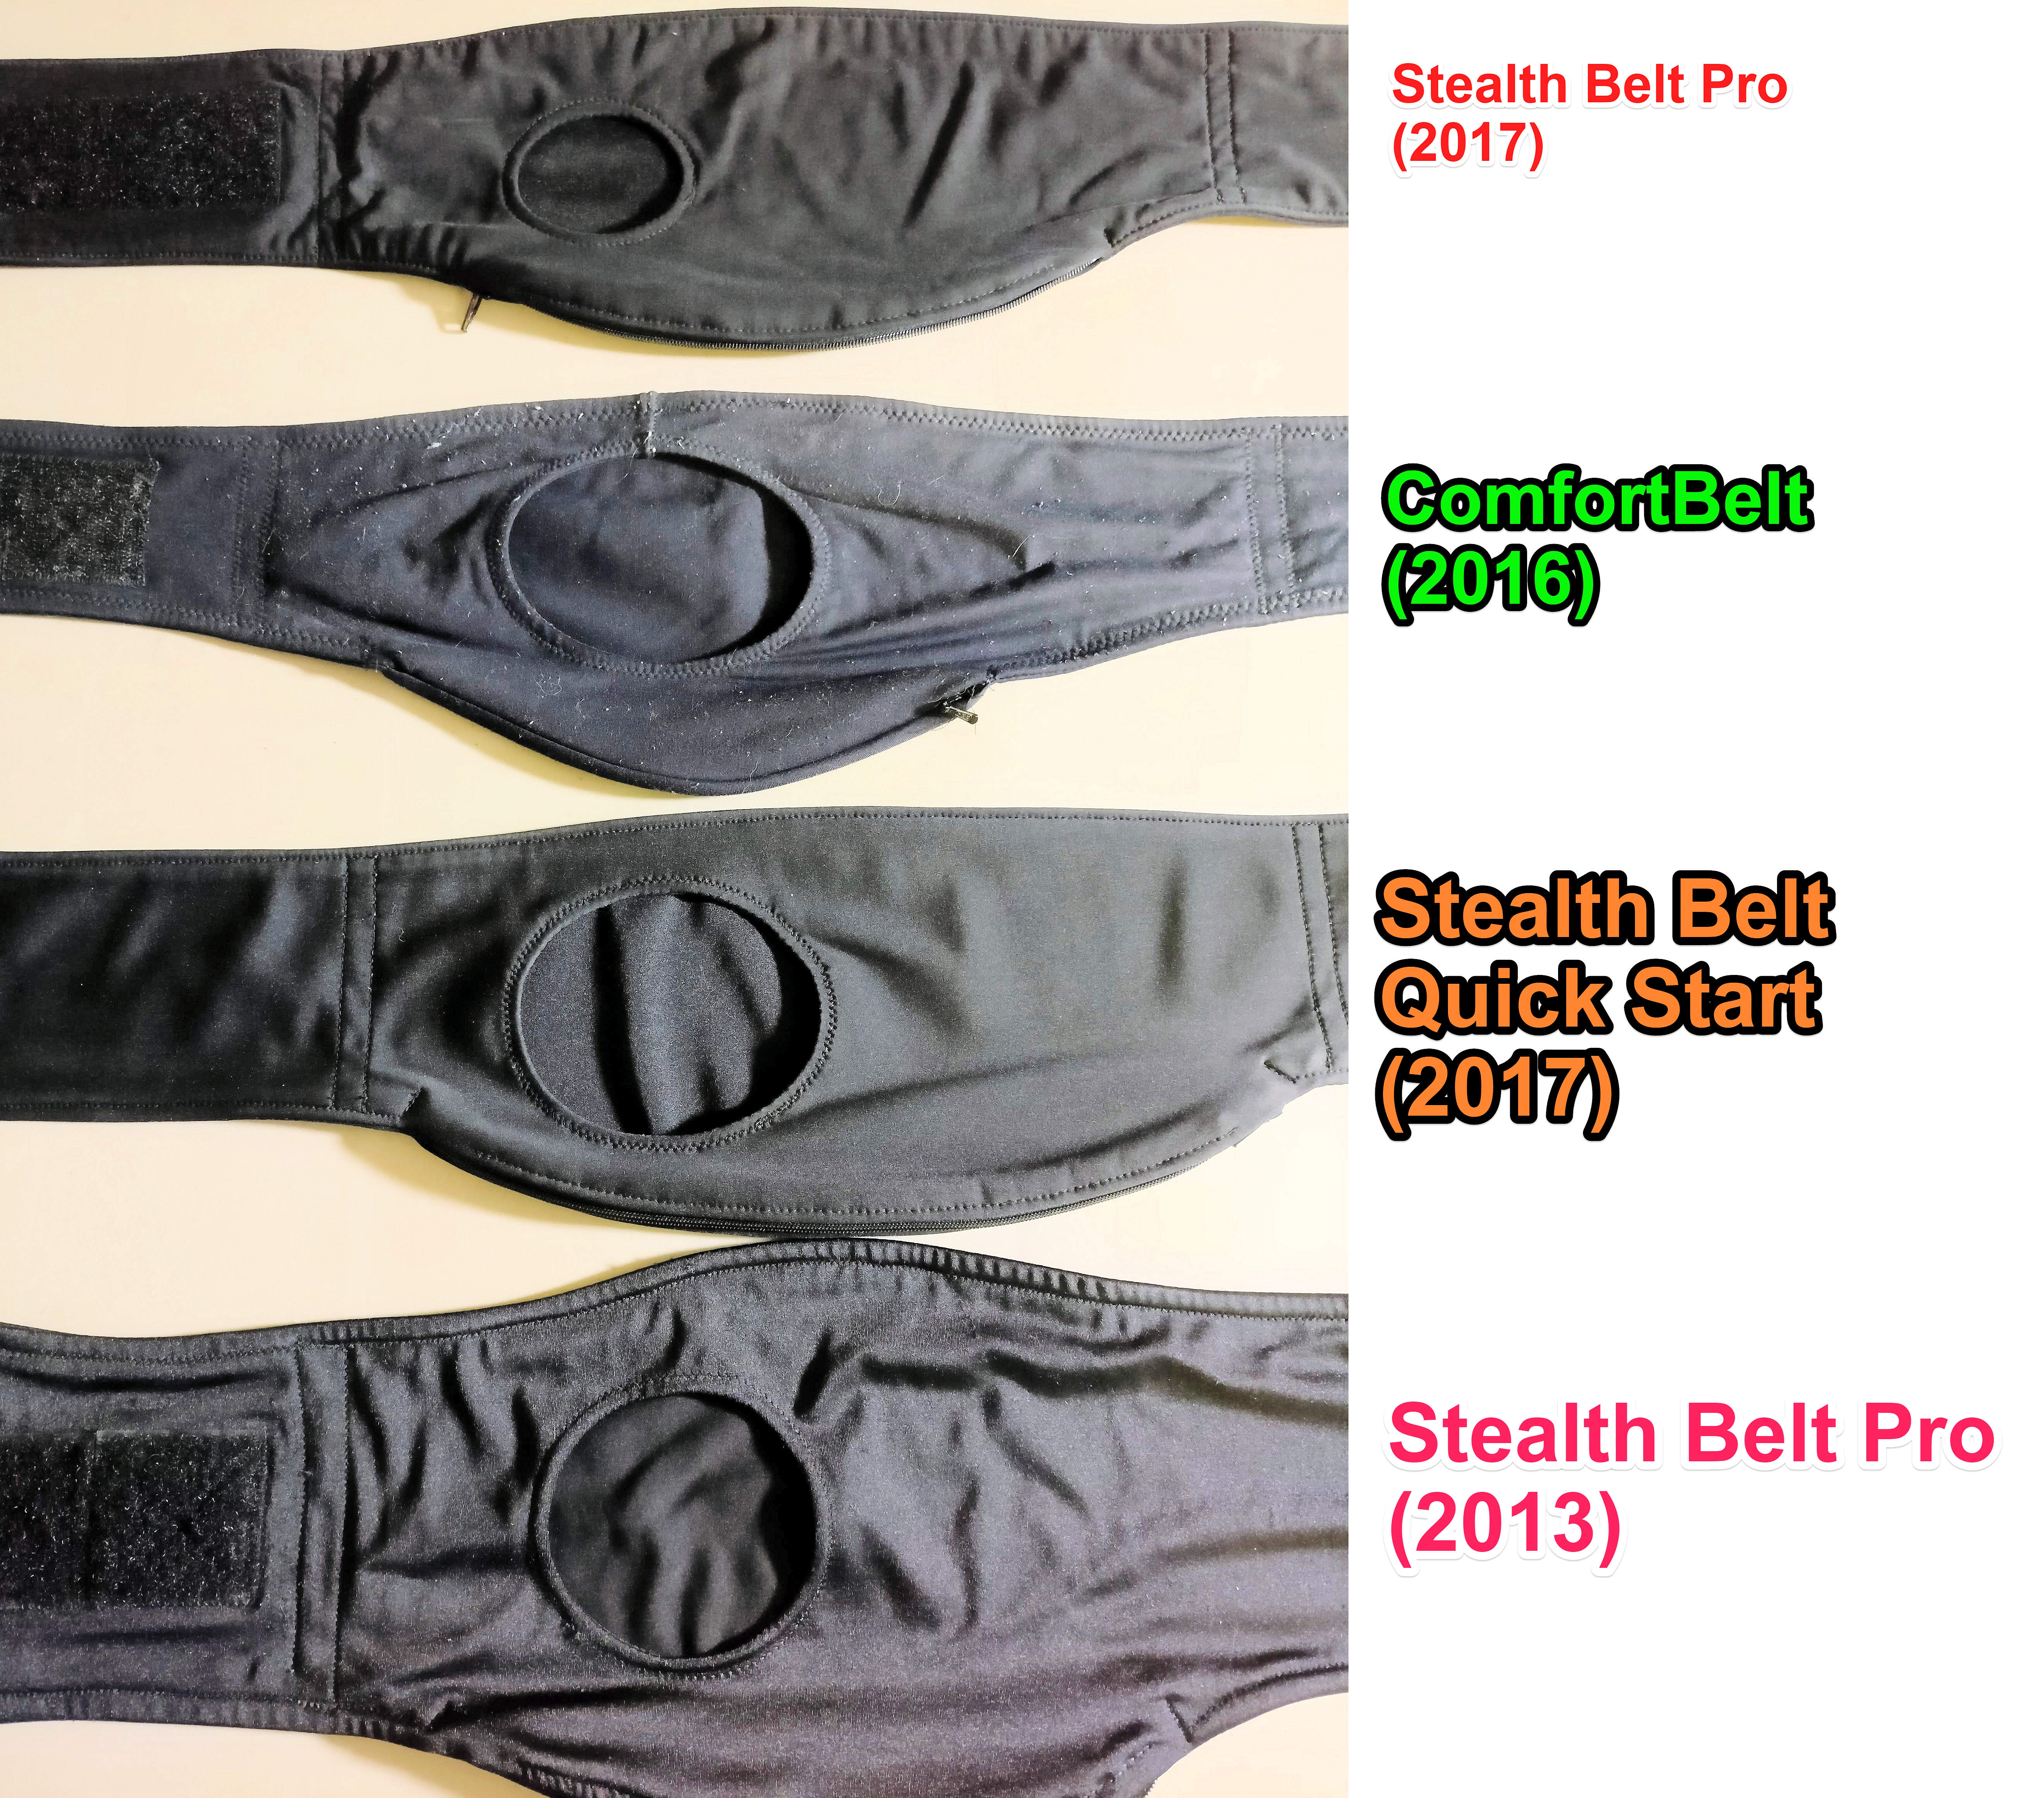 Stealth Belt - REVIEW